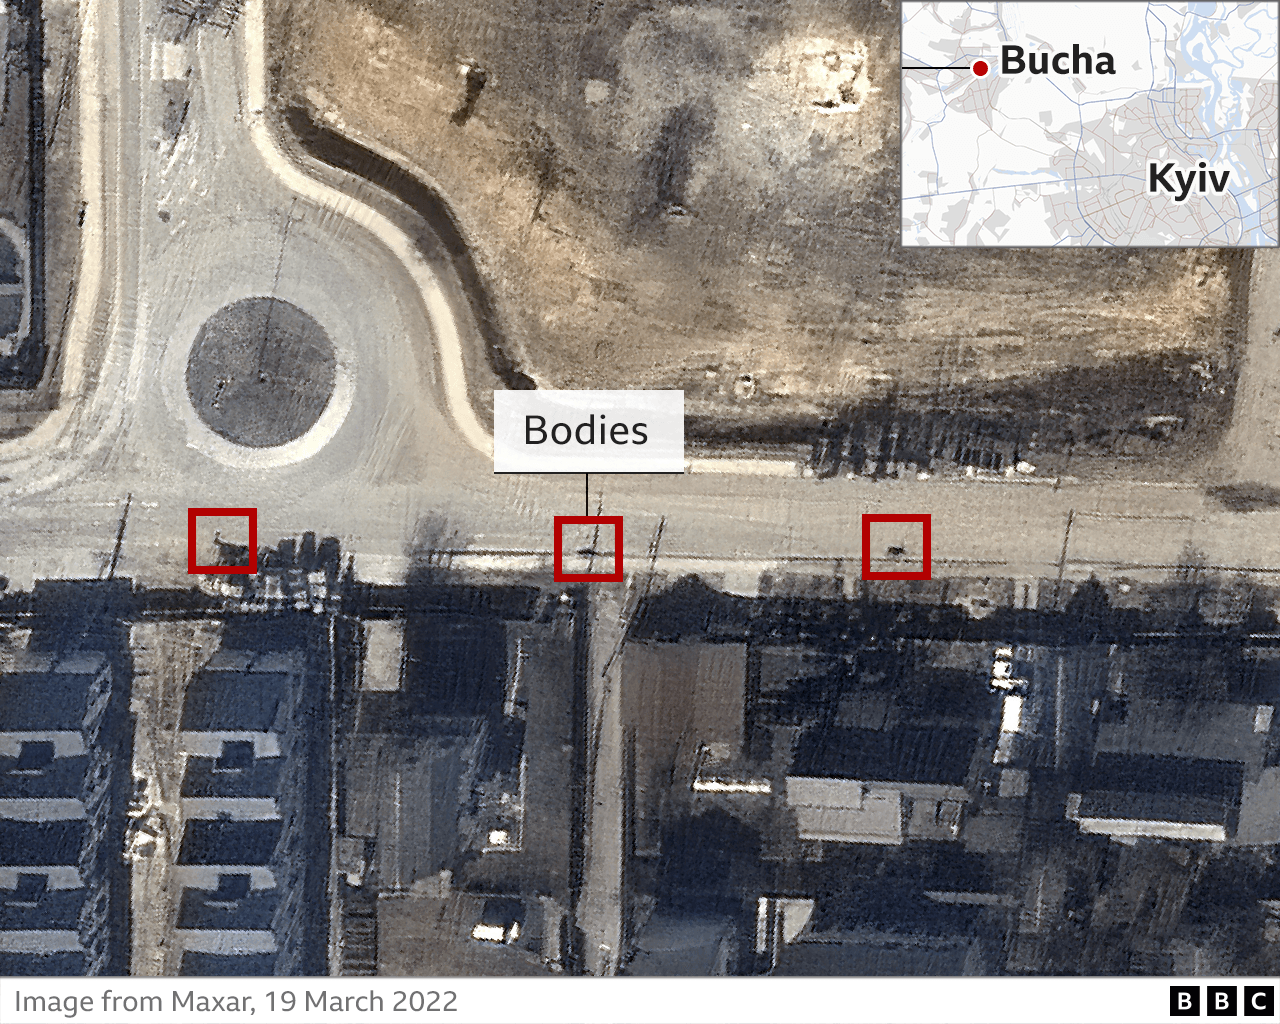 Bucha killings Satellite image of bodies site contradicts Russian claims pic